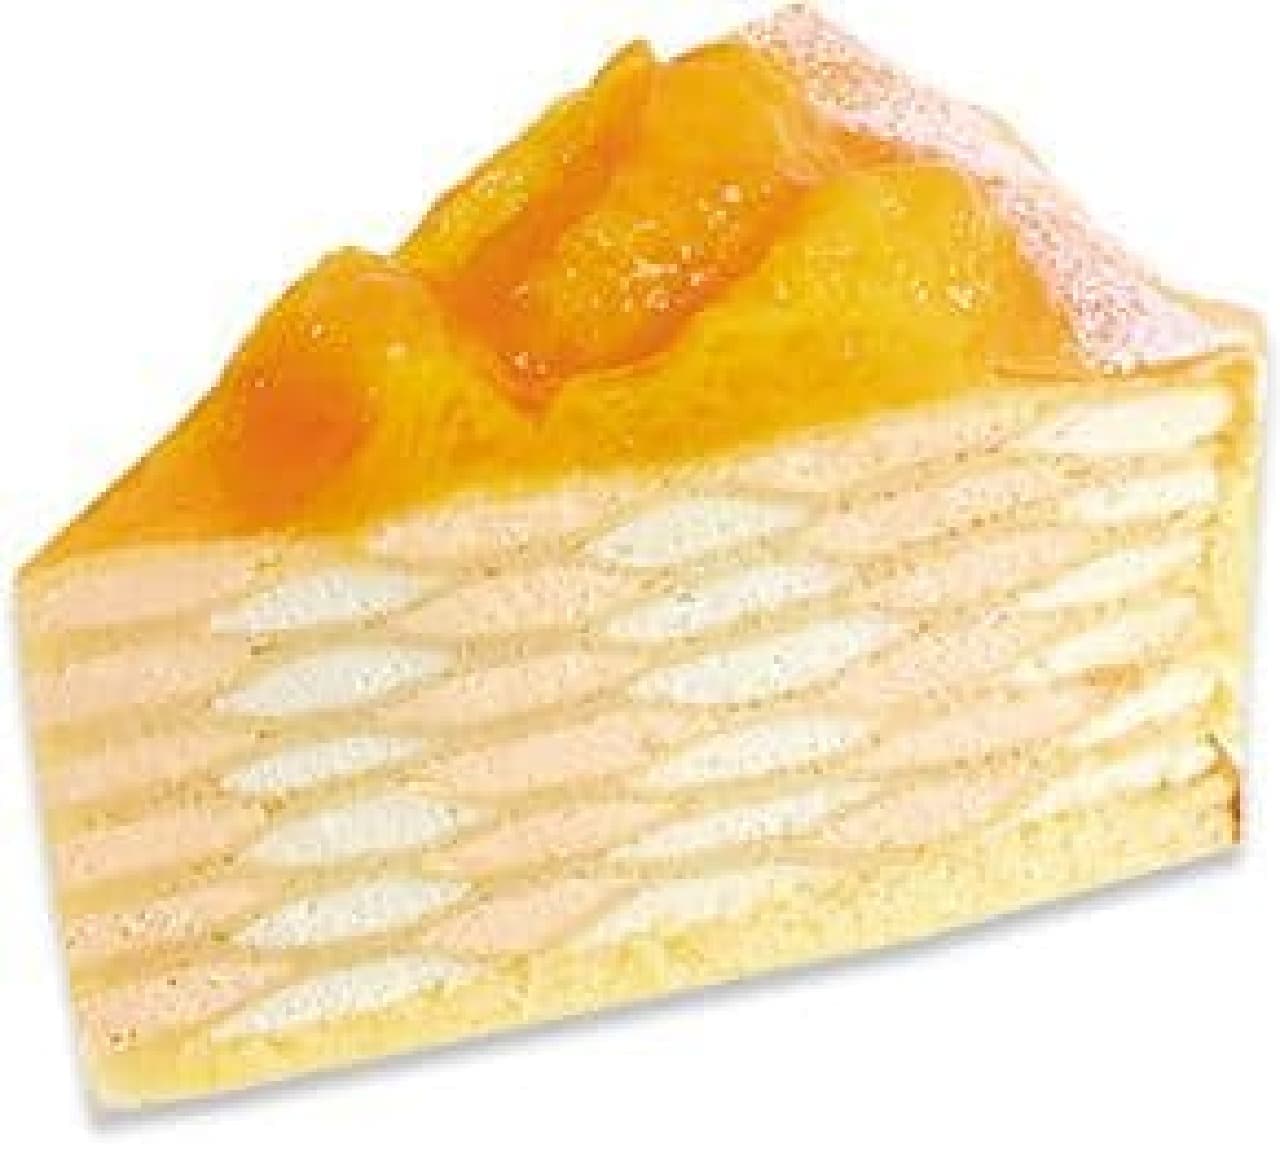 Fujiya "Mille Crepe with 3 kinds of fruits from Ehime".